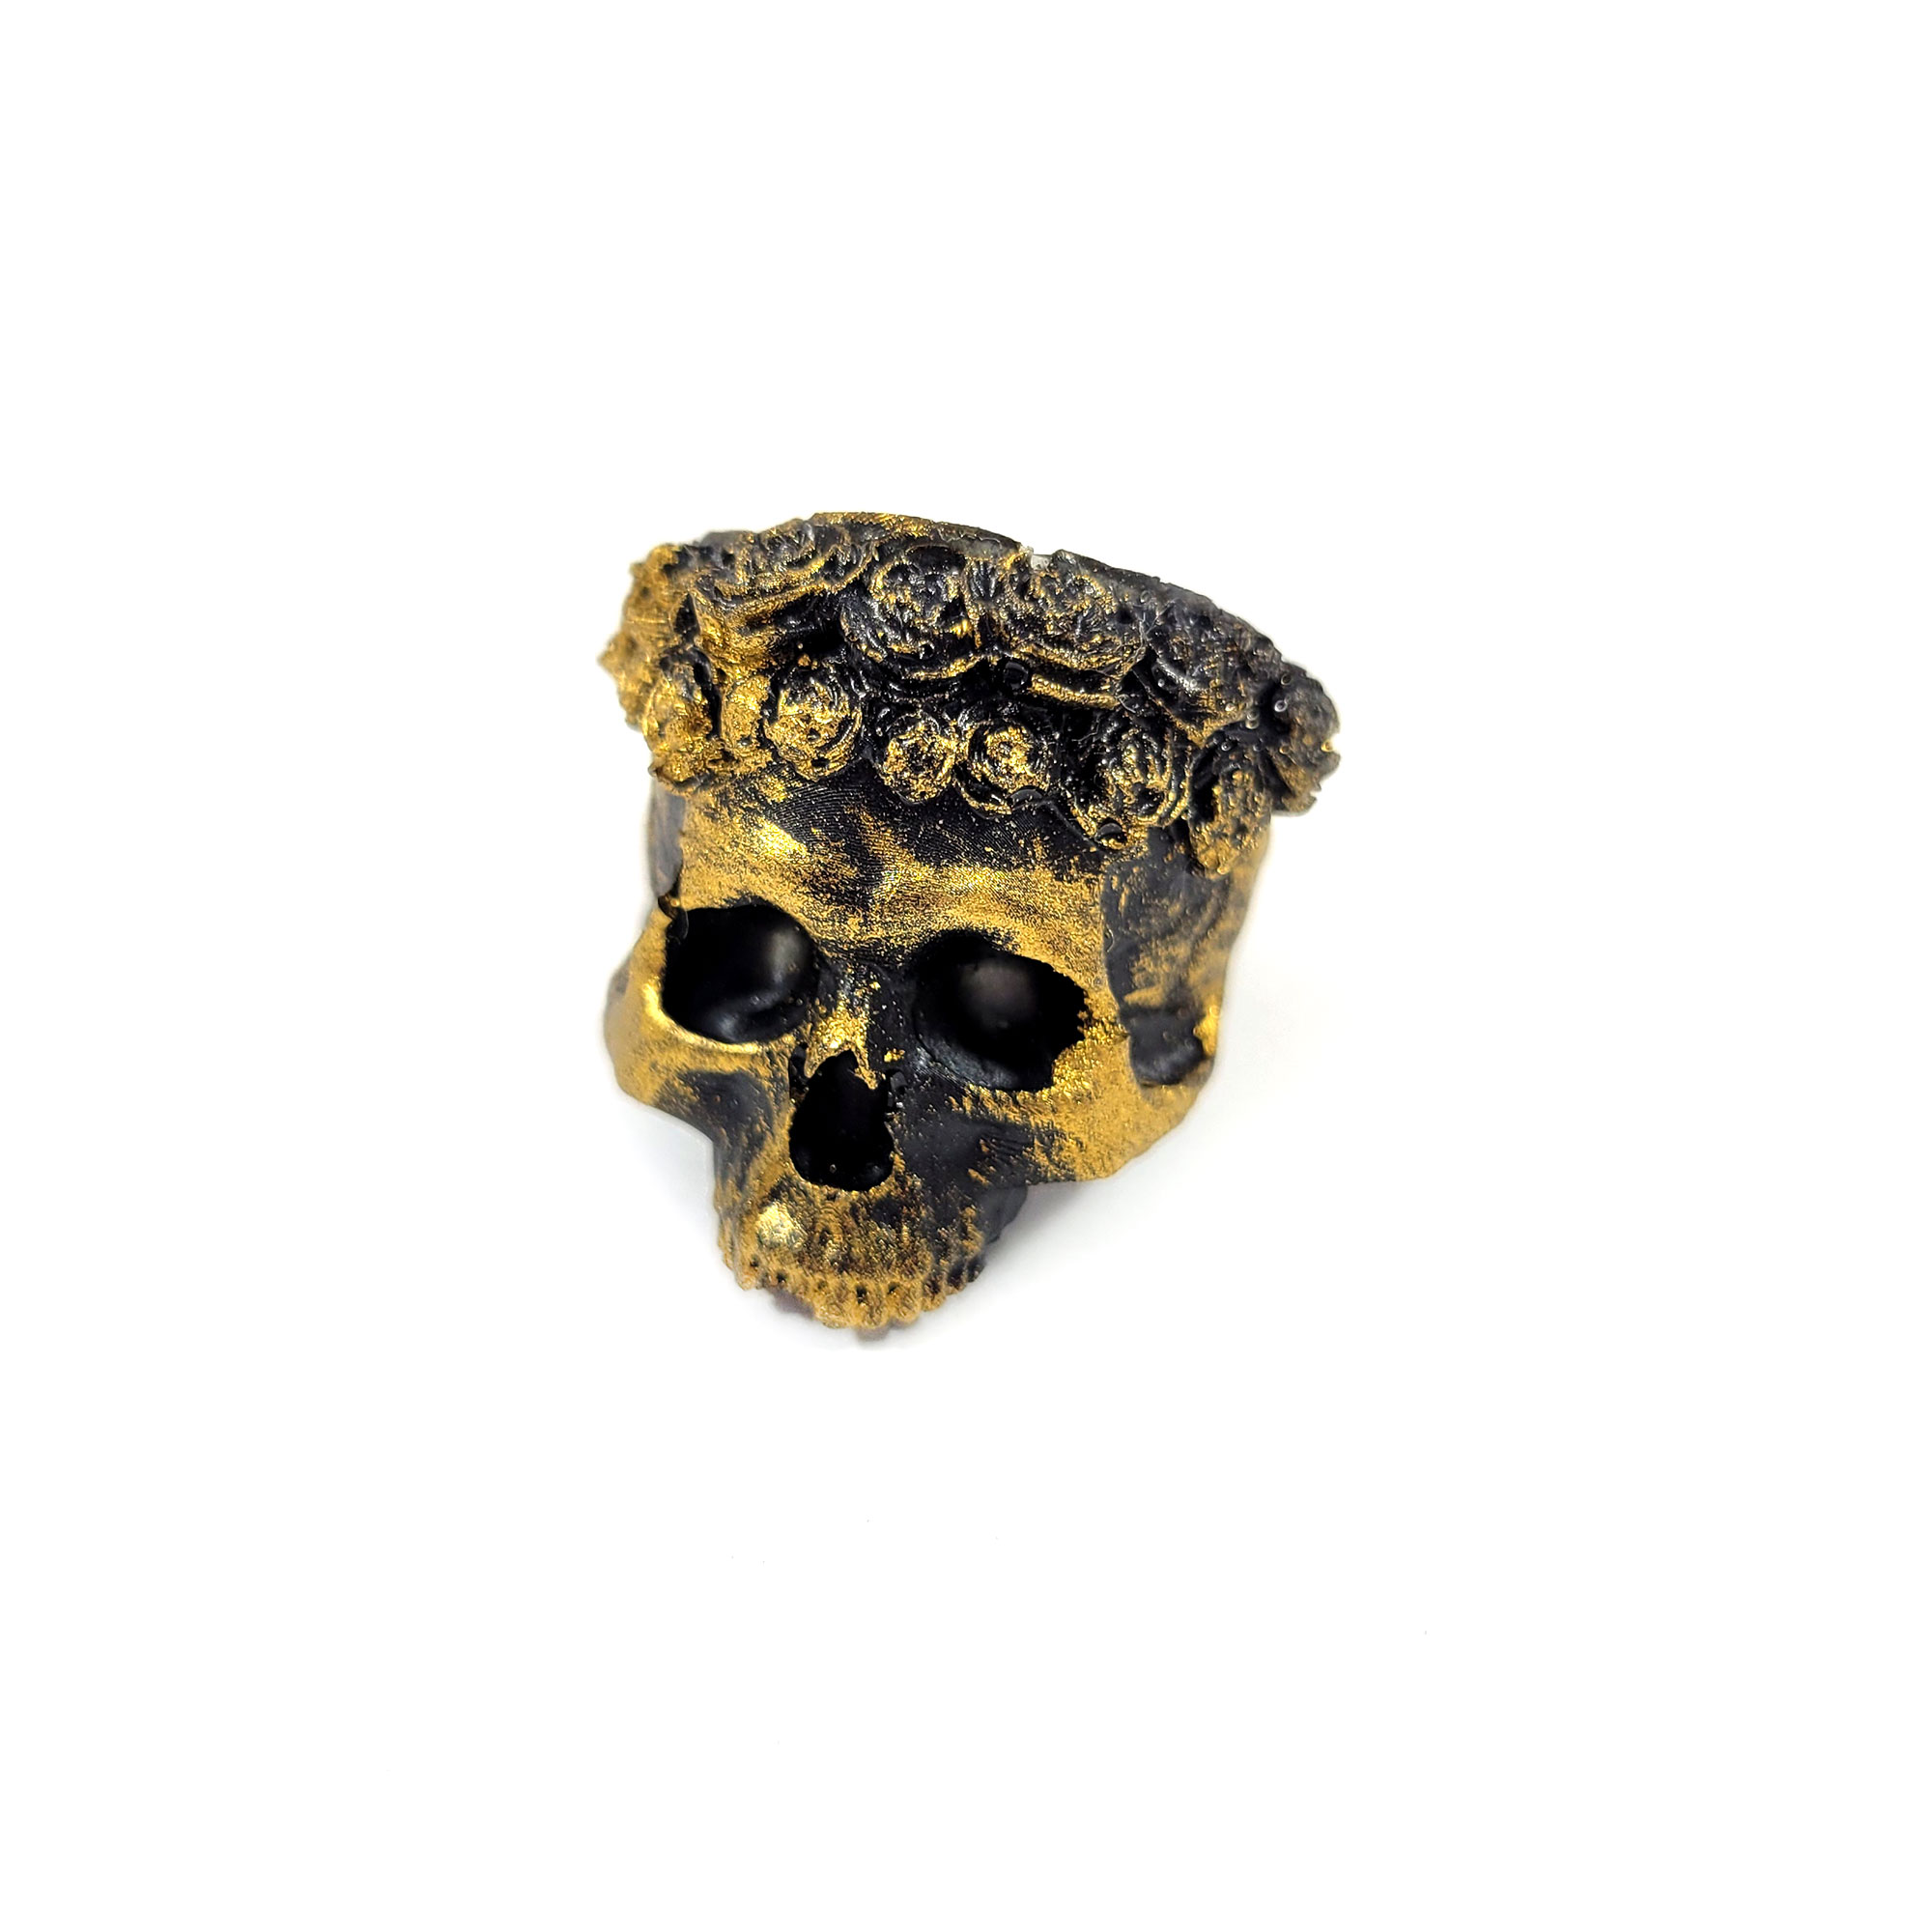 Black & Gold Floral Skull Ring by Wilde Designs